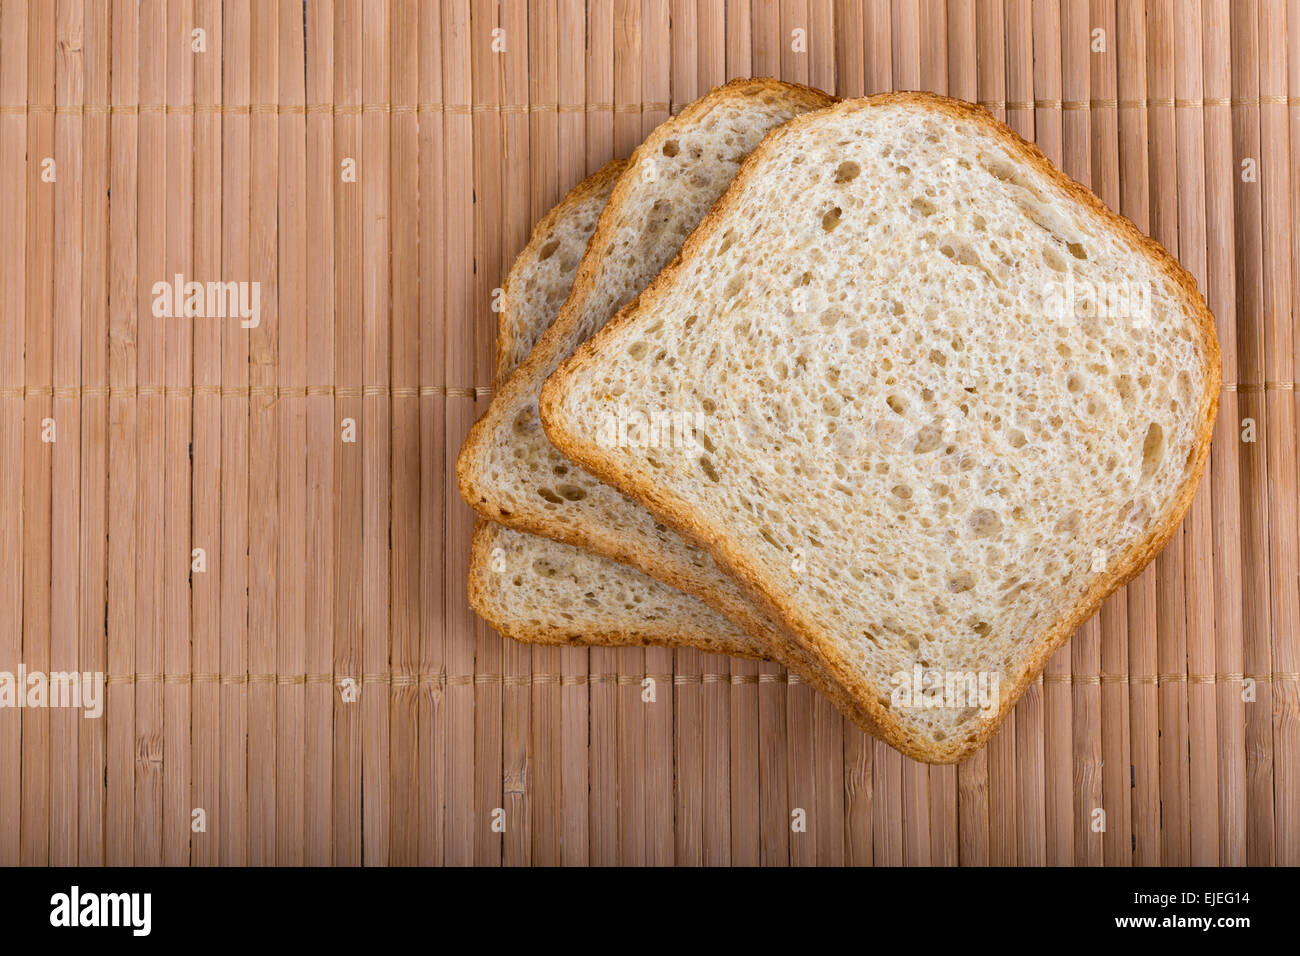 Slices of white bread on a wooden tablecloth, top view Stock Photo